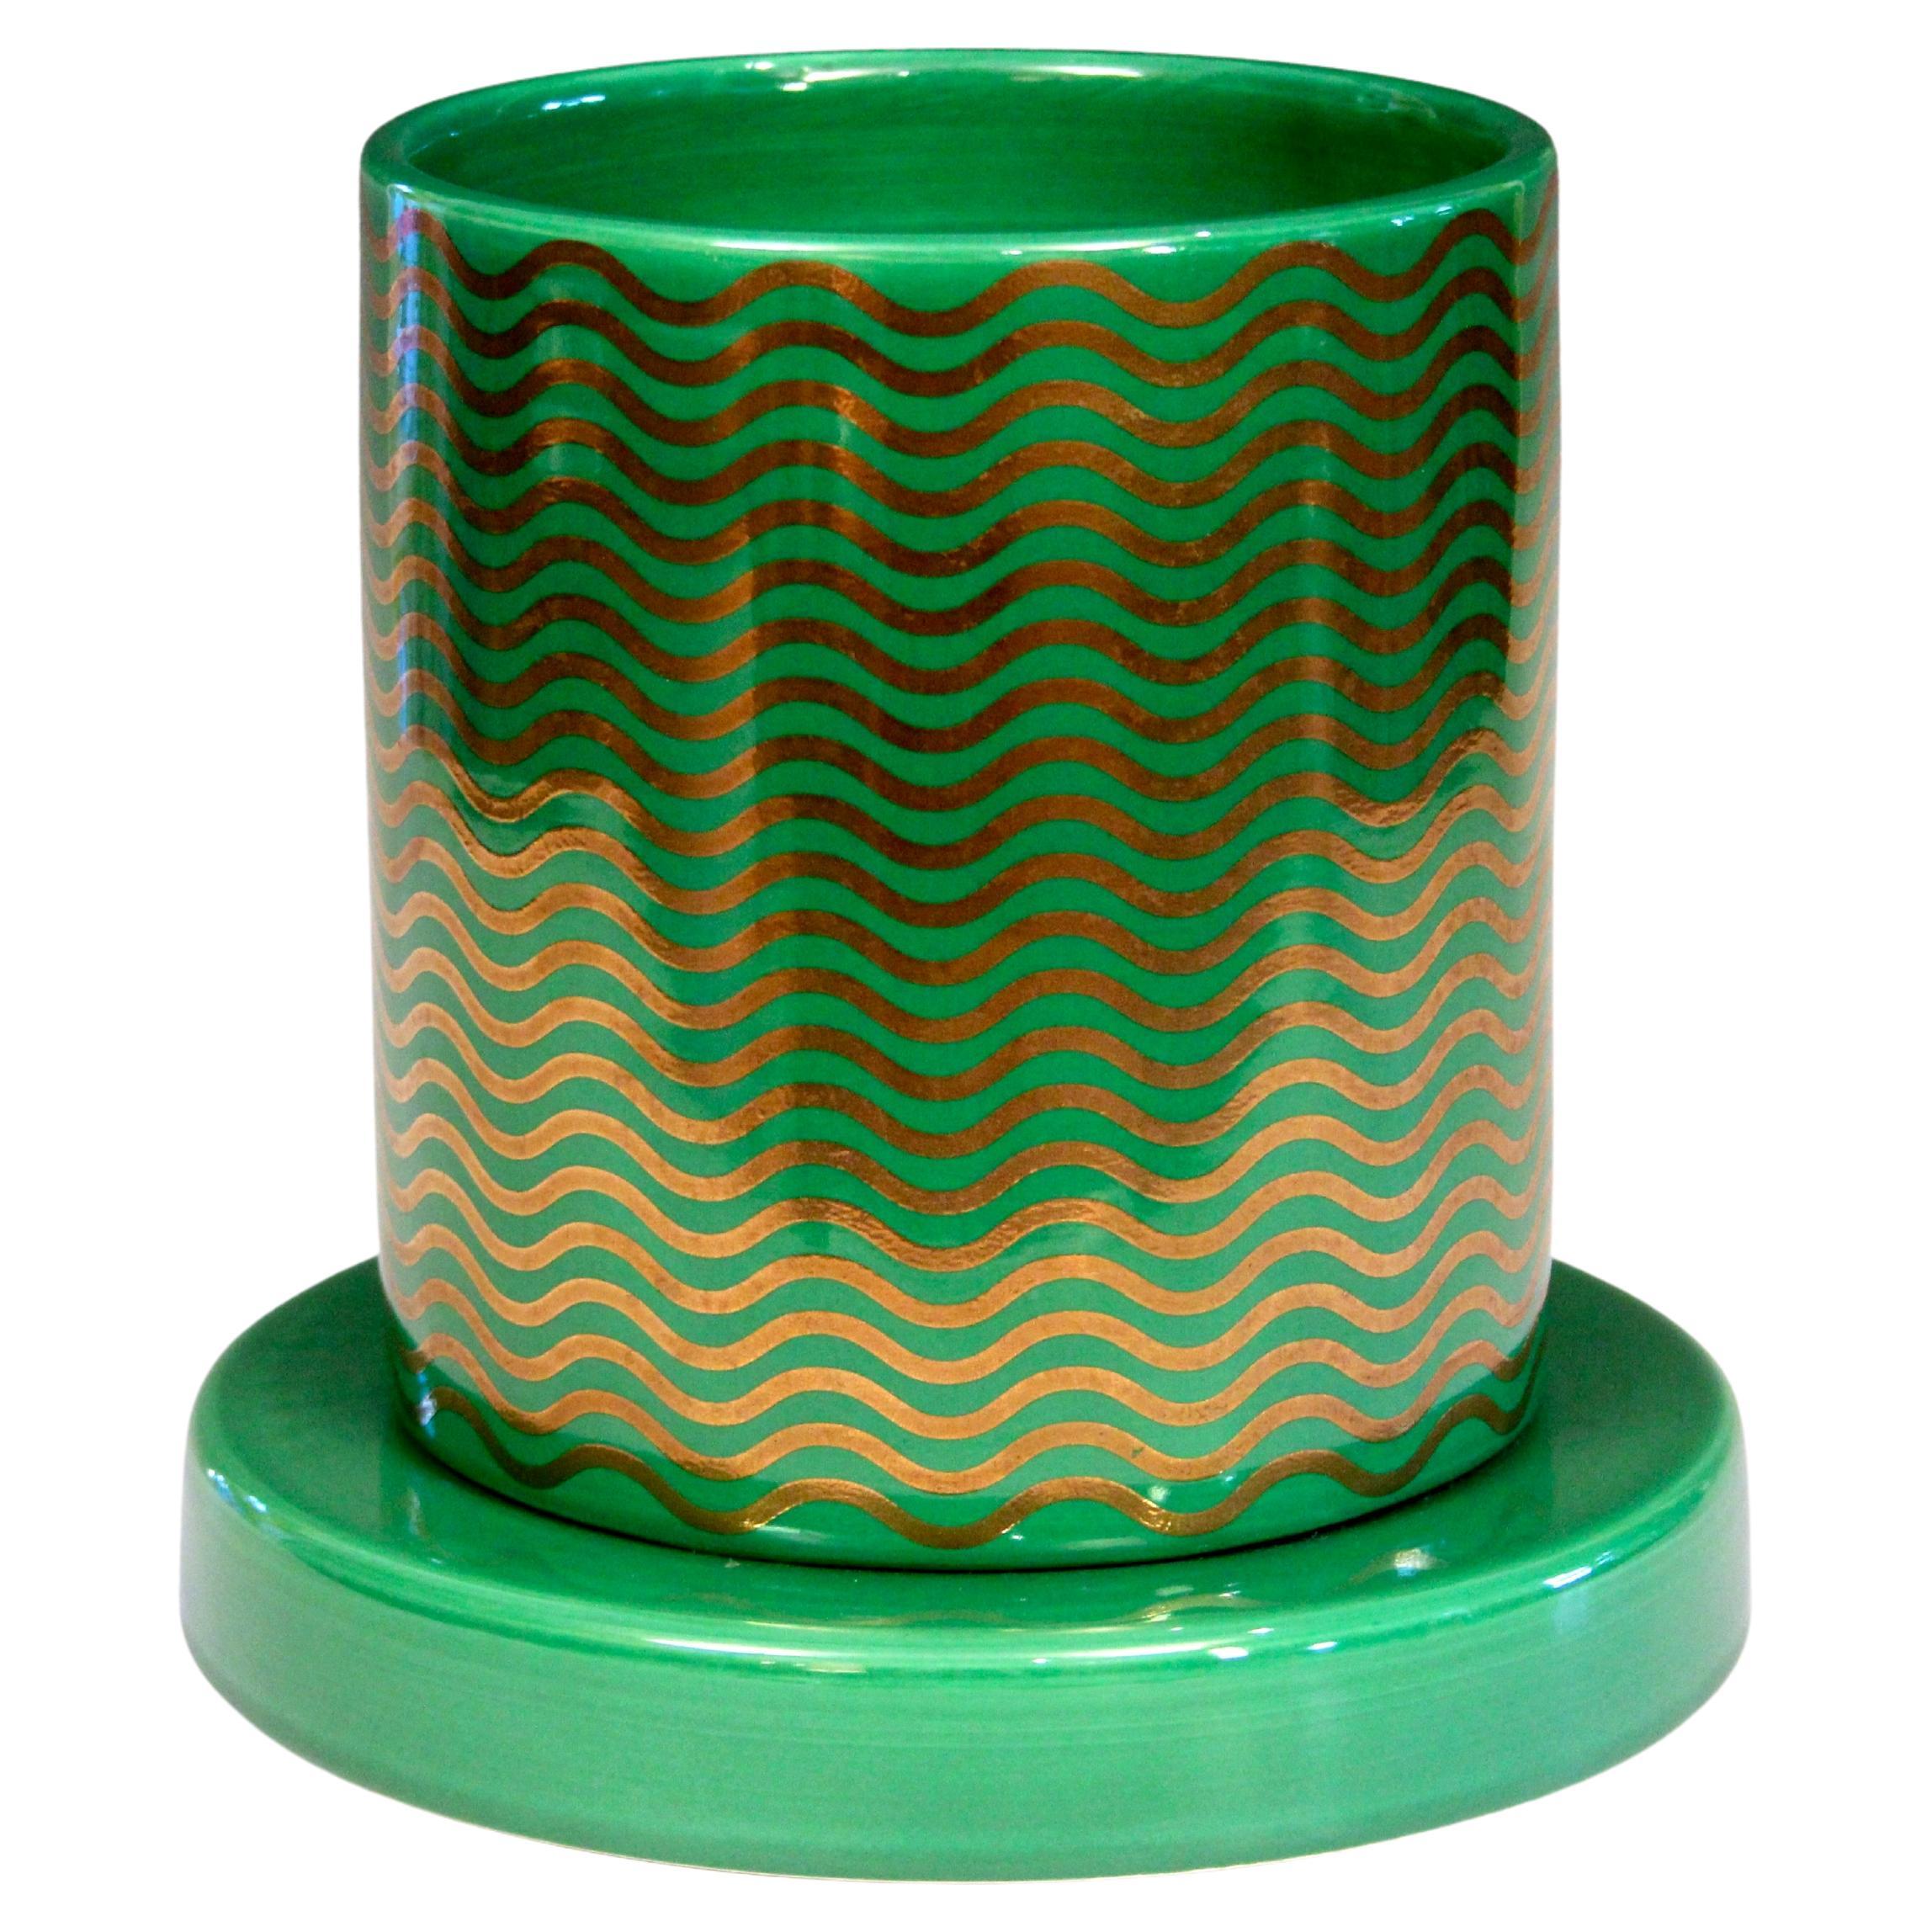 Ettore Sottsass Vase Mediterraneo Green Gilt Waves Lavori in Corso Signed Dated For Sale